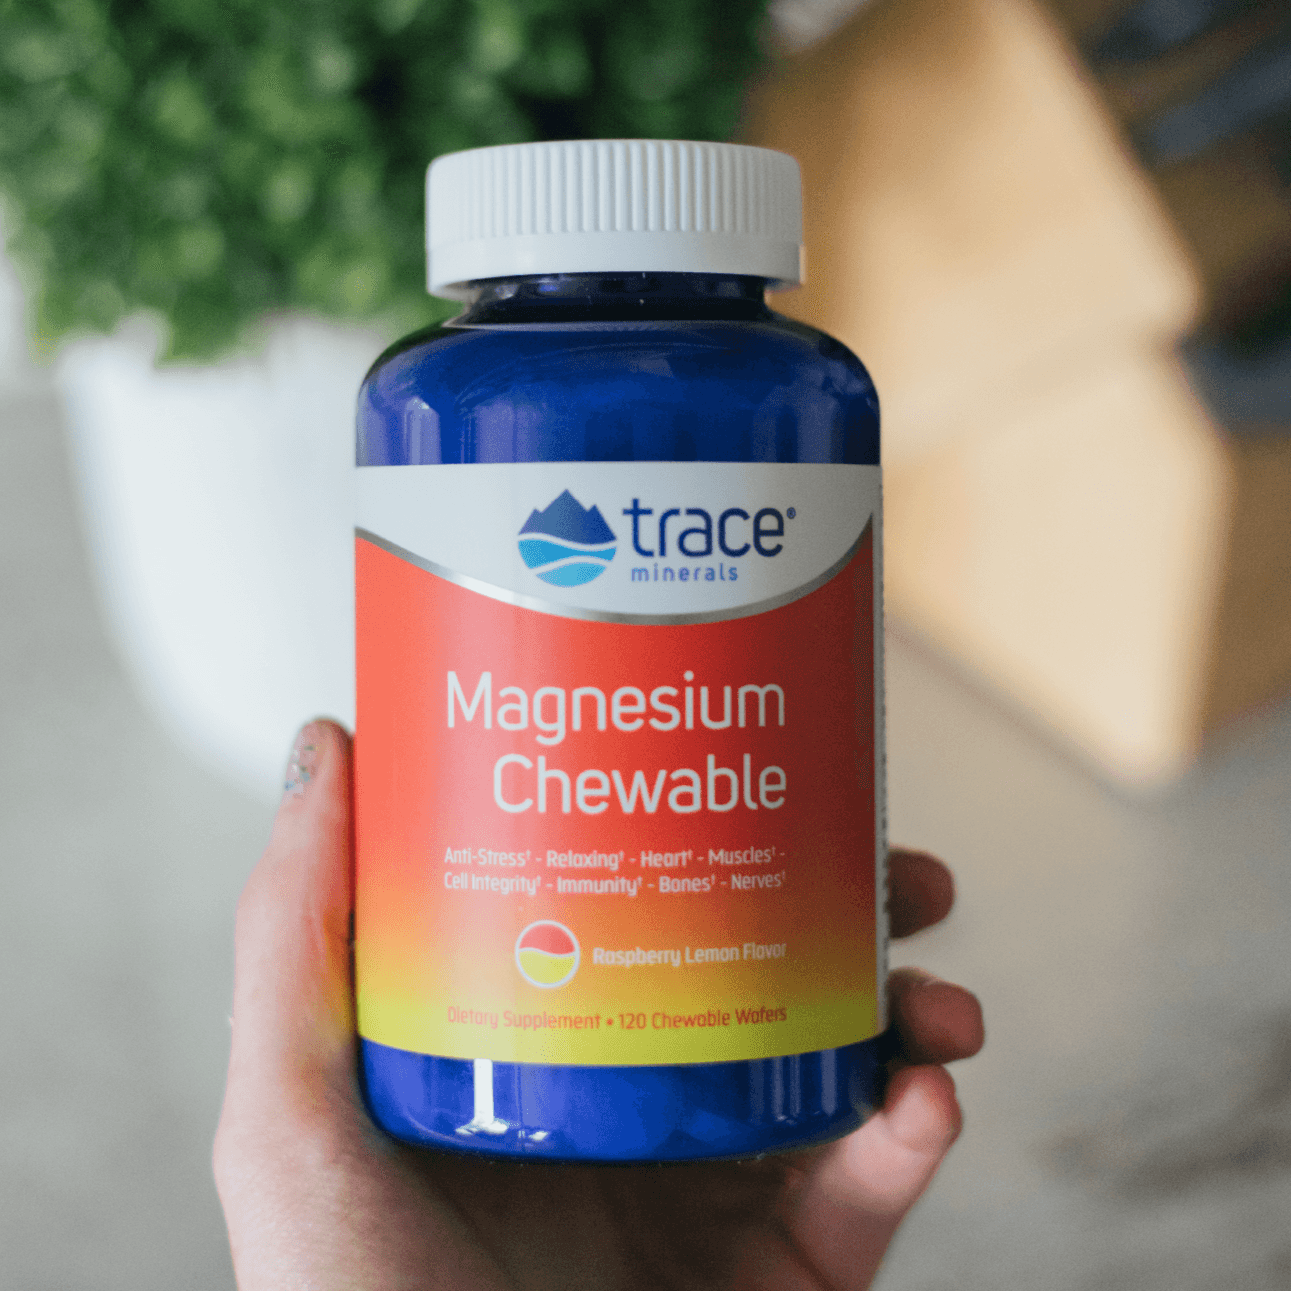 Magnesium Chewable - Trace Minerals